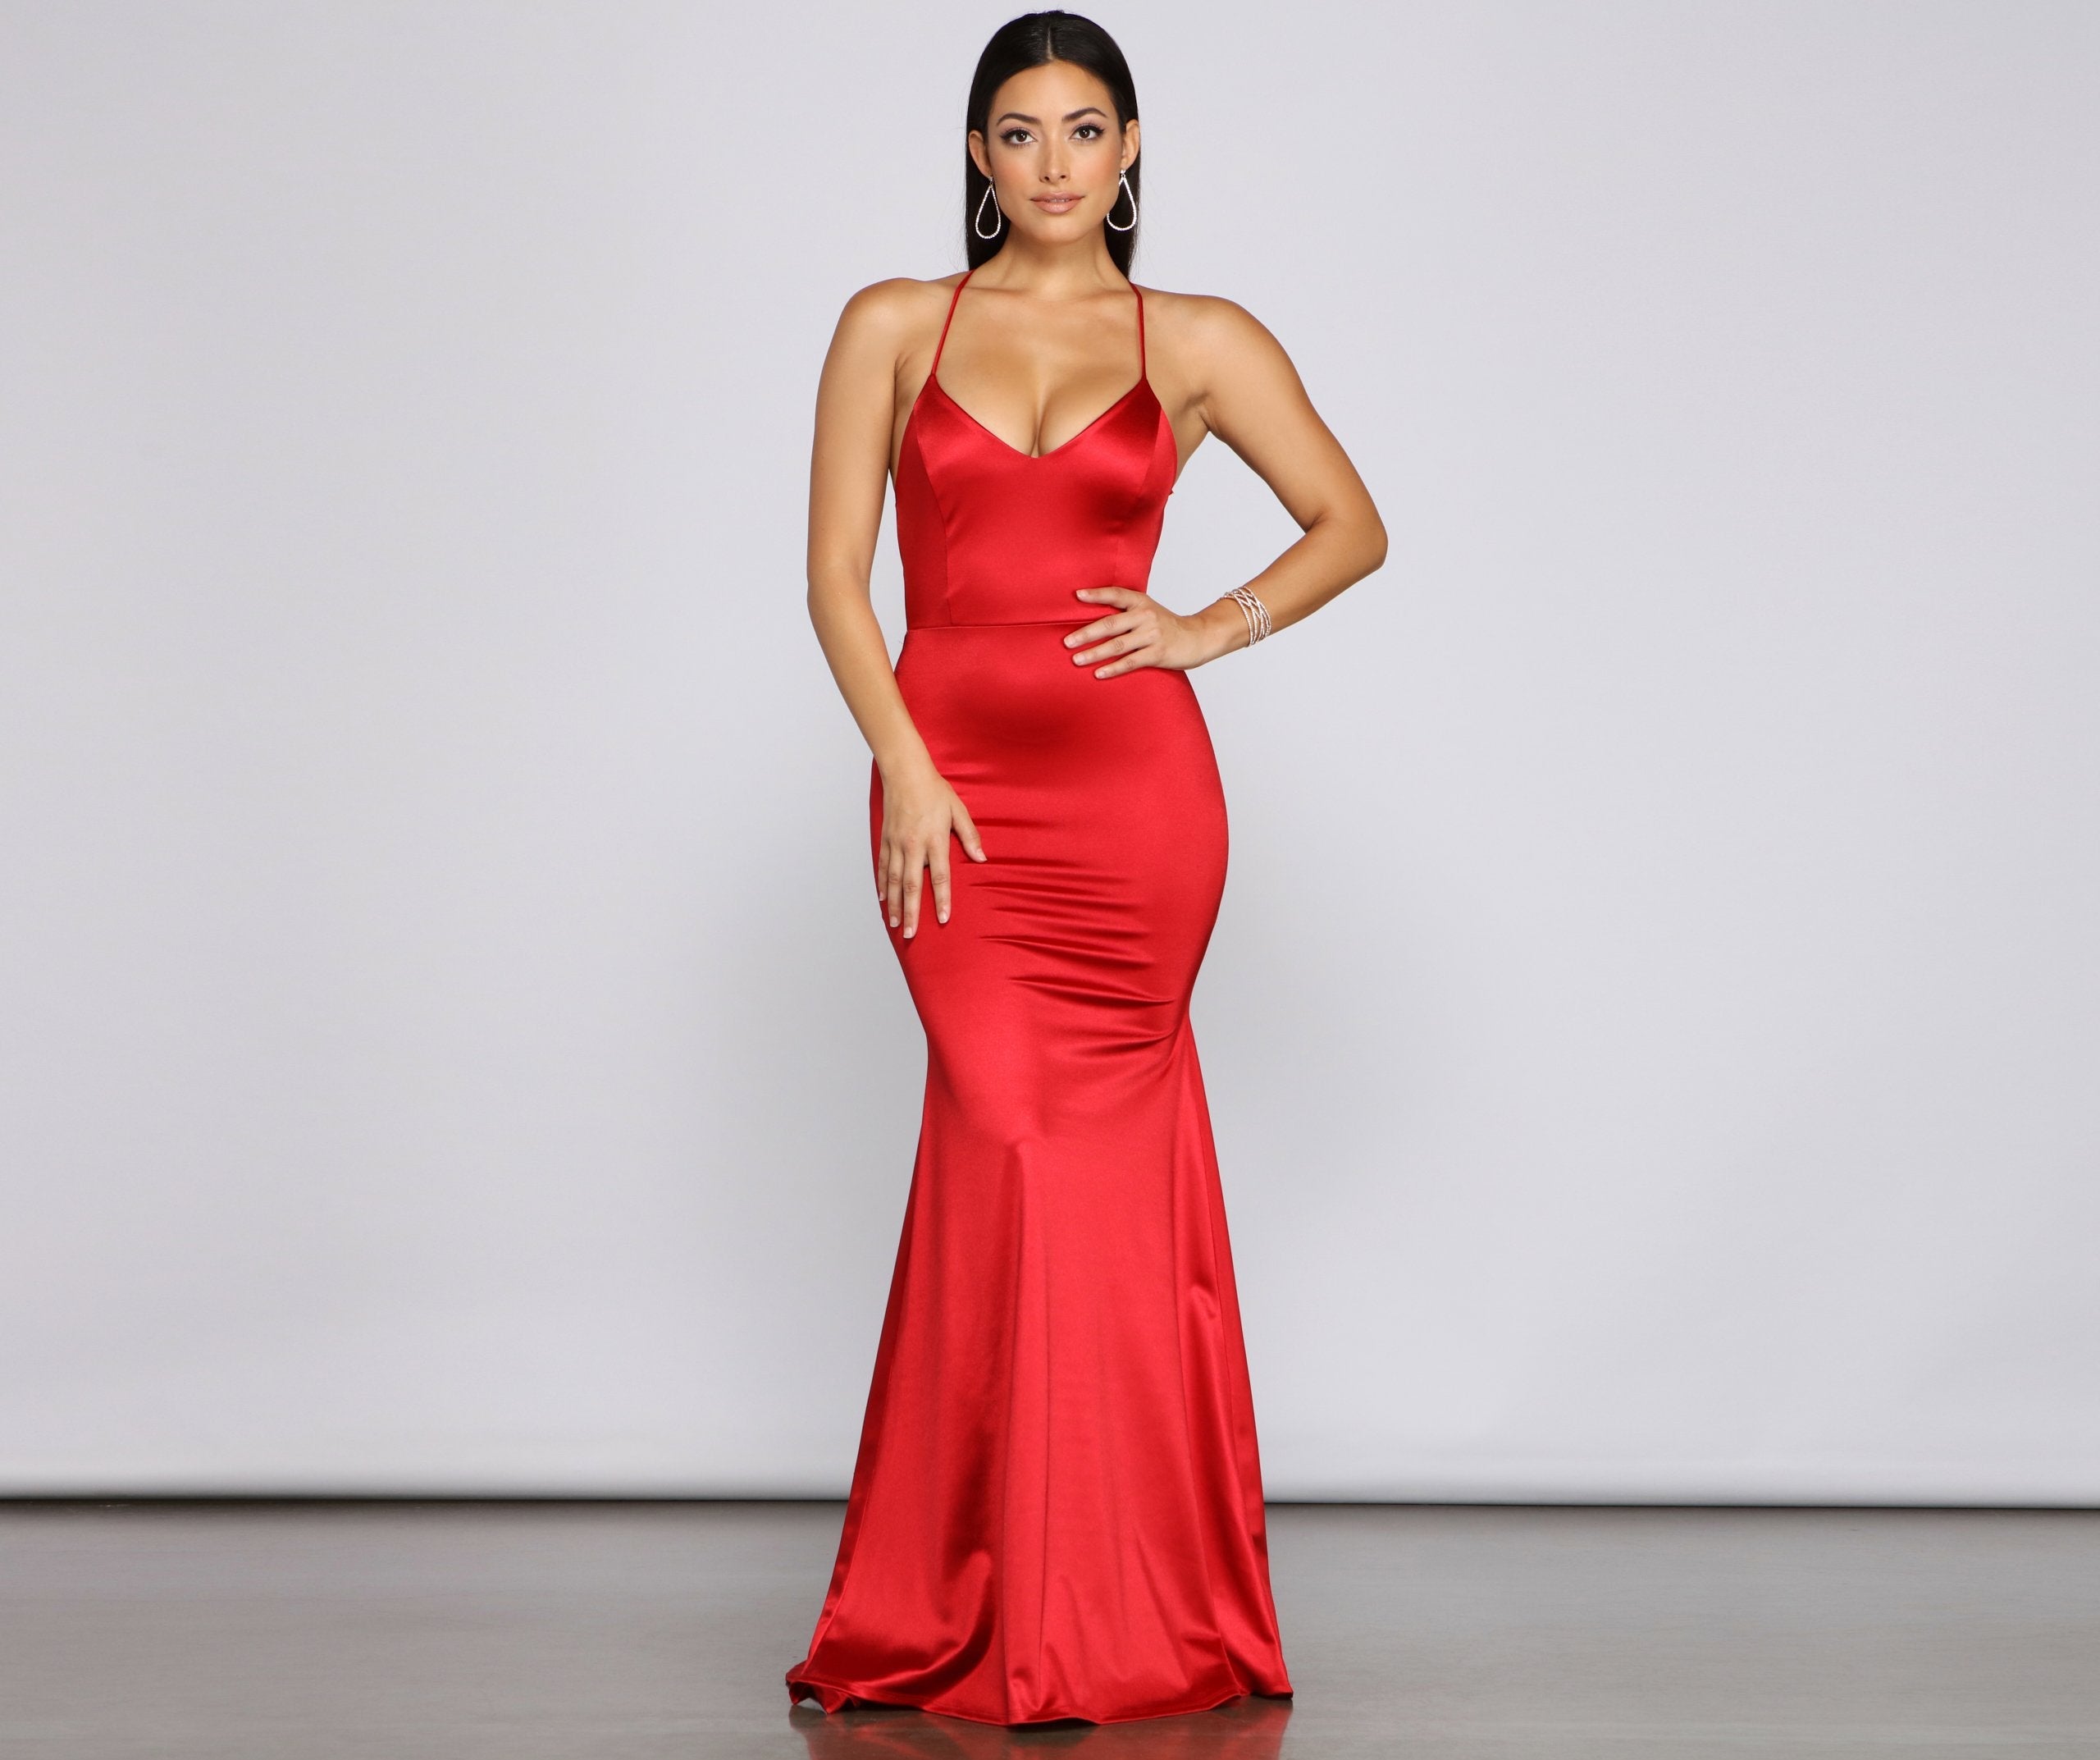 Nola Darling Satin Evening Gown - Lady Occasions